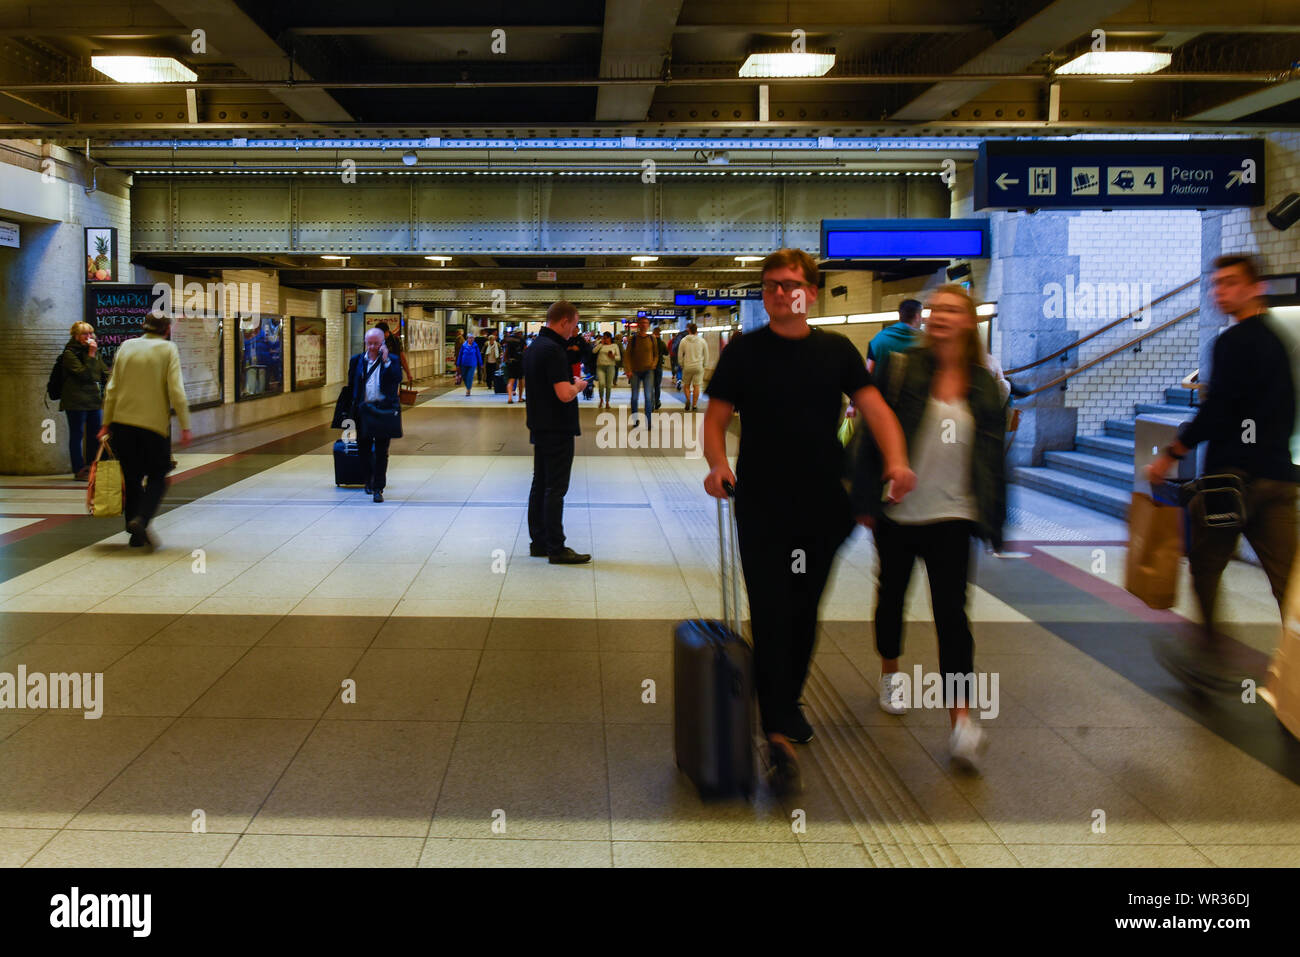 Wroclaw, Poland. 07th Sep, 2019. Passengers walk by the access tunnel for the train platforms at Wroclaw train station.Wroclaw is the fourth biggest city in Poland and the largest city in the region of Silesia. Wroclaw or Breslau in German spent more than 200 years under German rule but after World War II the region was placed under Polish authority by the Potsdam Agreement under territorial changes requested by the Soviet Union. Credit: SOPA Images Limited/Alamy Live News Stock Photo